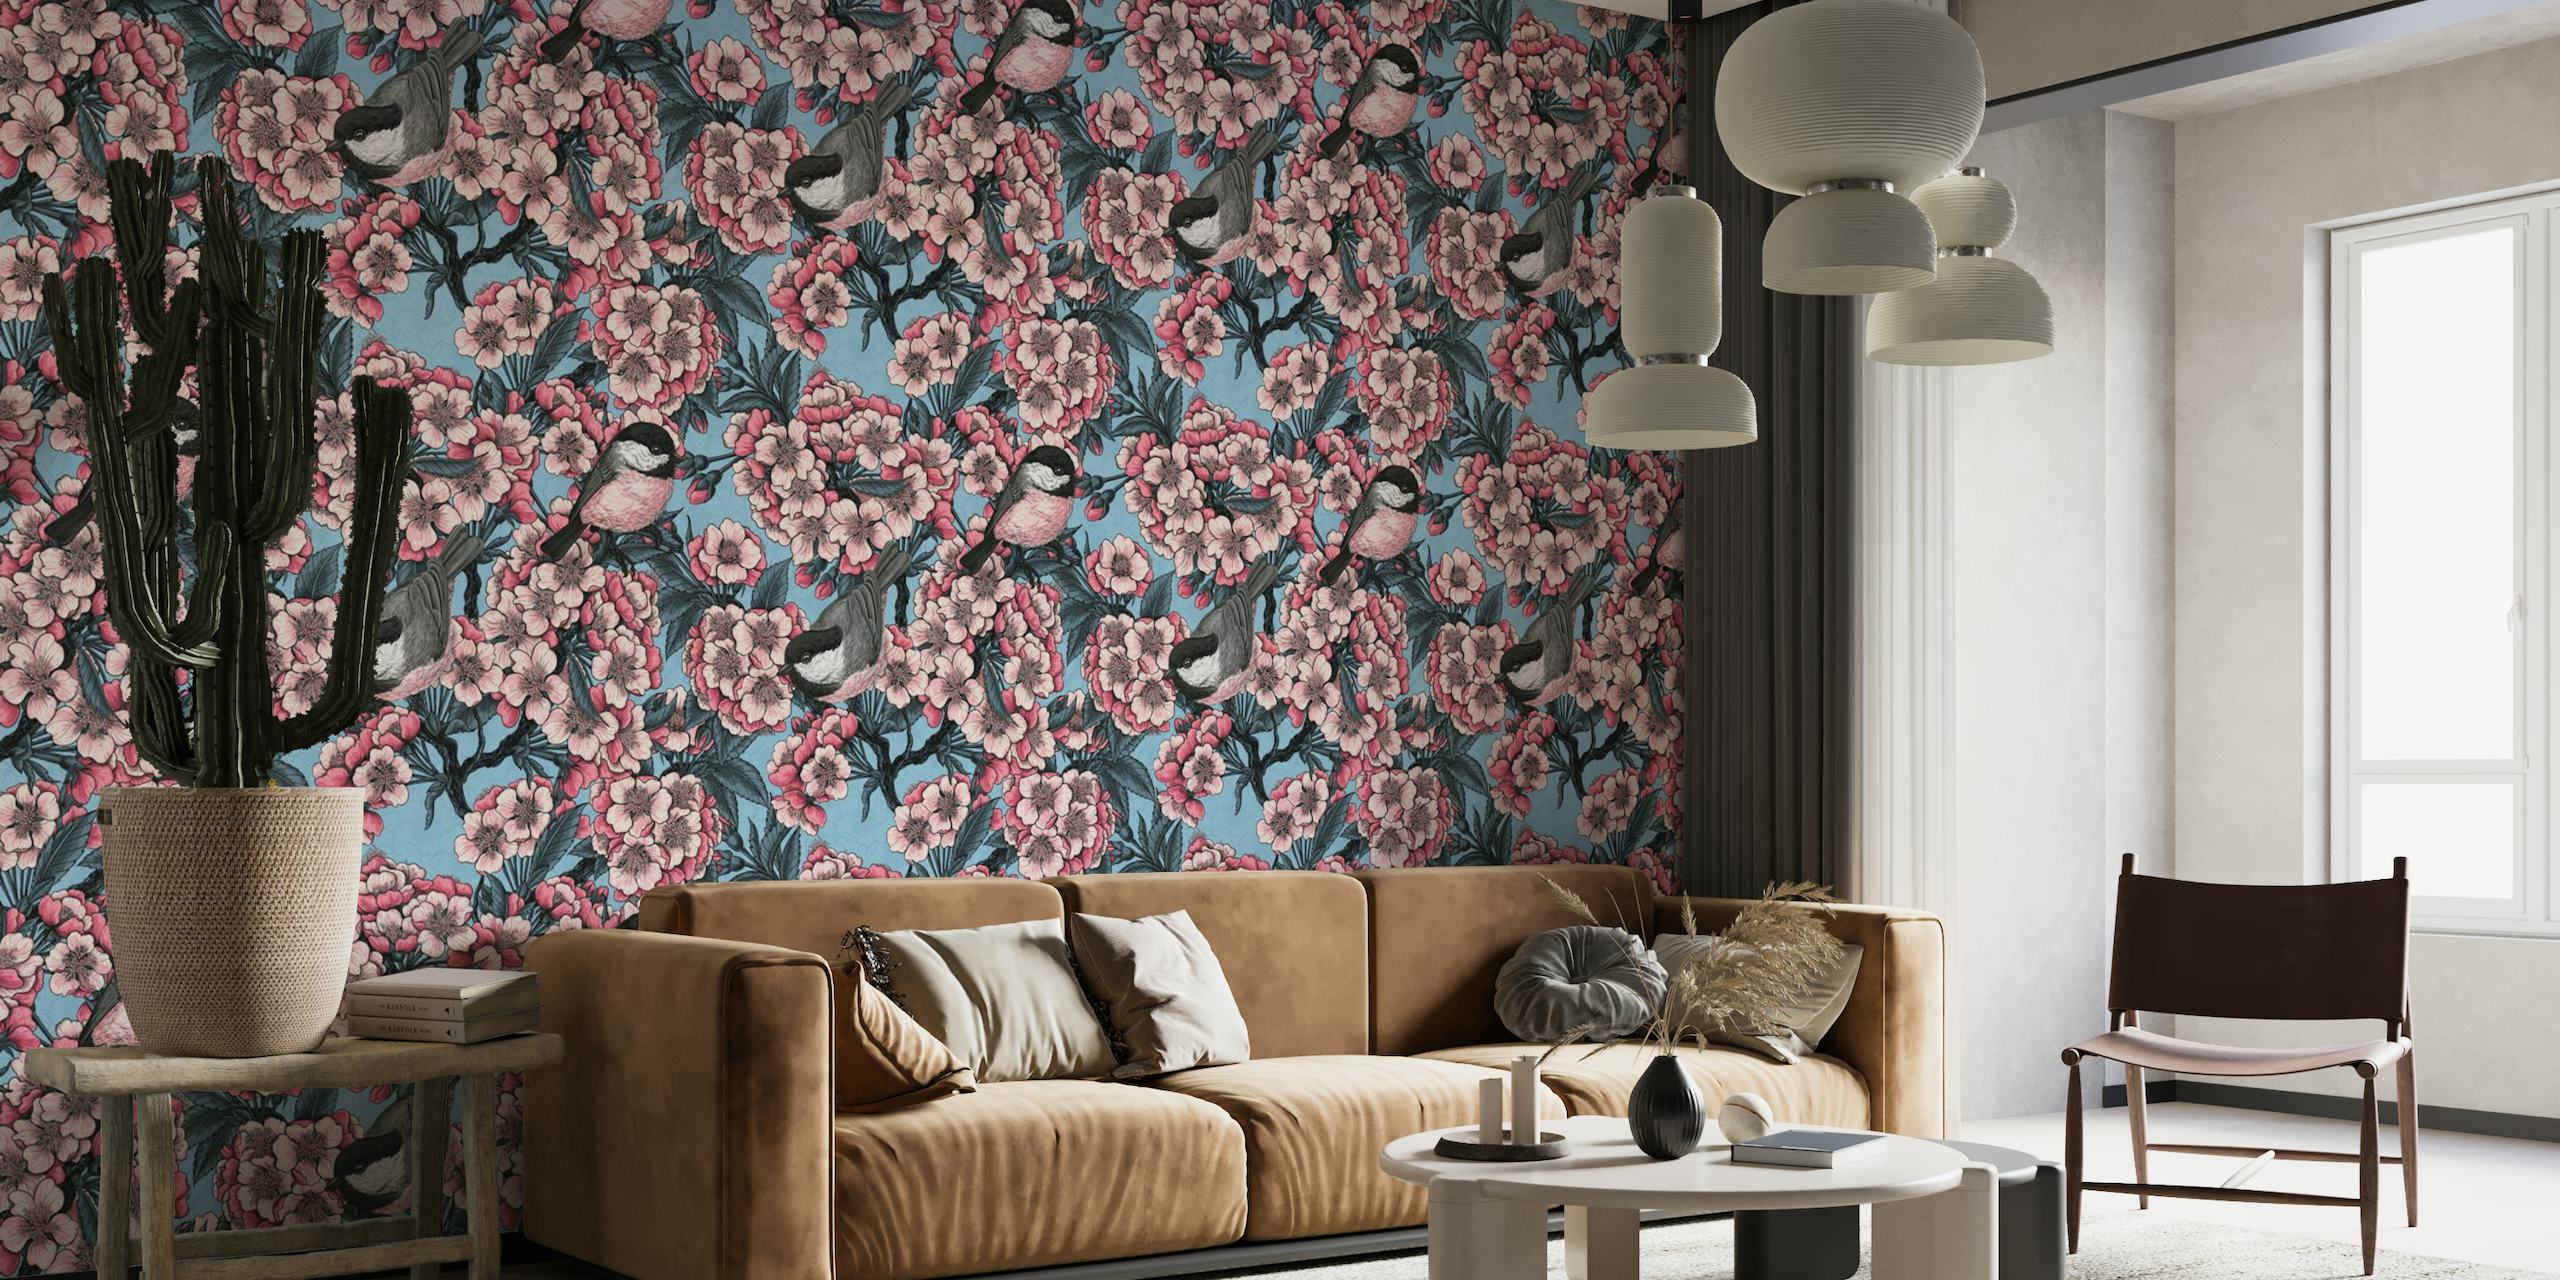 Cherry blossom and birds in pink and blue wallpaper